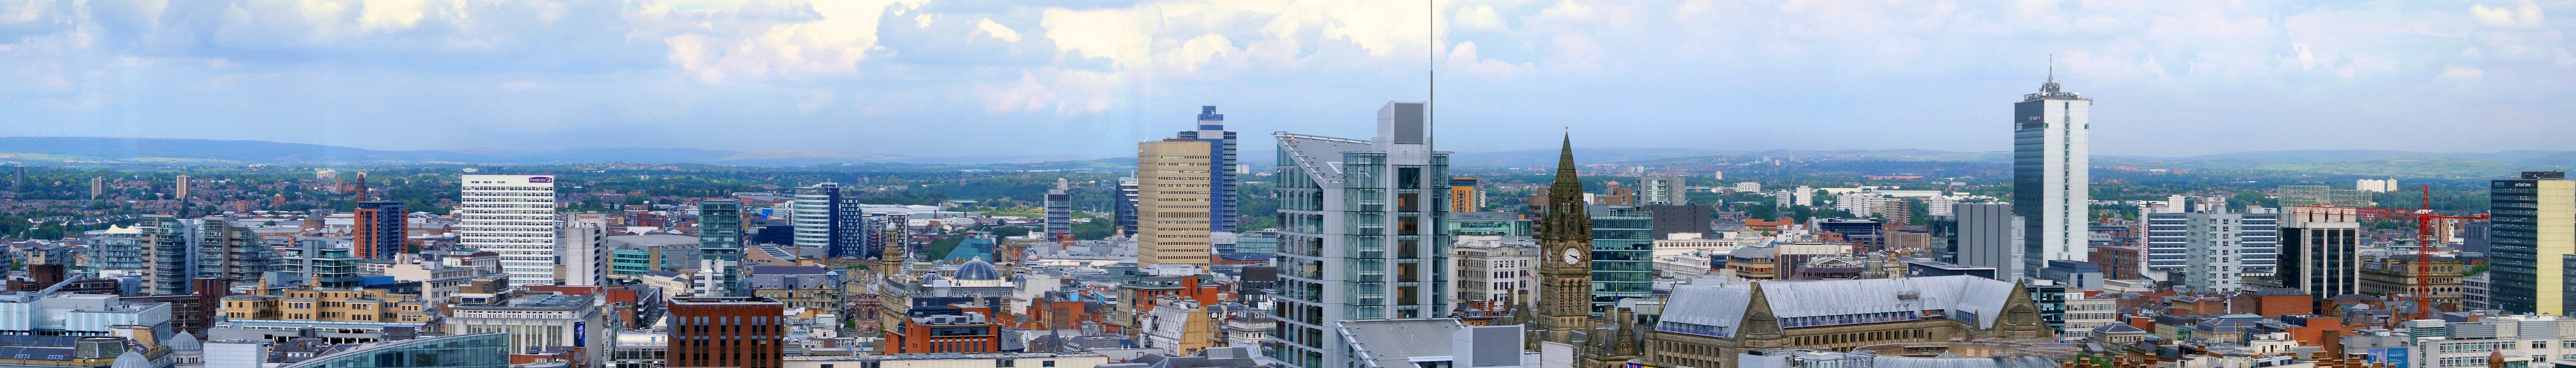 Manchester skyline image from - https://www.google.com/url?sa=i&url=https%3A%2F%2Fcommons.wikimedia.org%2Fwiki%2FFile%3AManchester_banner_Panorama.jpg&psig=AOvVaw3rC-KyLb9lcmcvt1Bc-4OK&ust=1720862337393000&source=images&cd=vfe&opi=89978449&ved=0CBEQjRxqFwoTCODq5vWVoYcDFQAAAAAdAAAAABAE